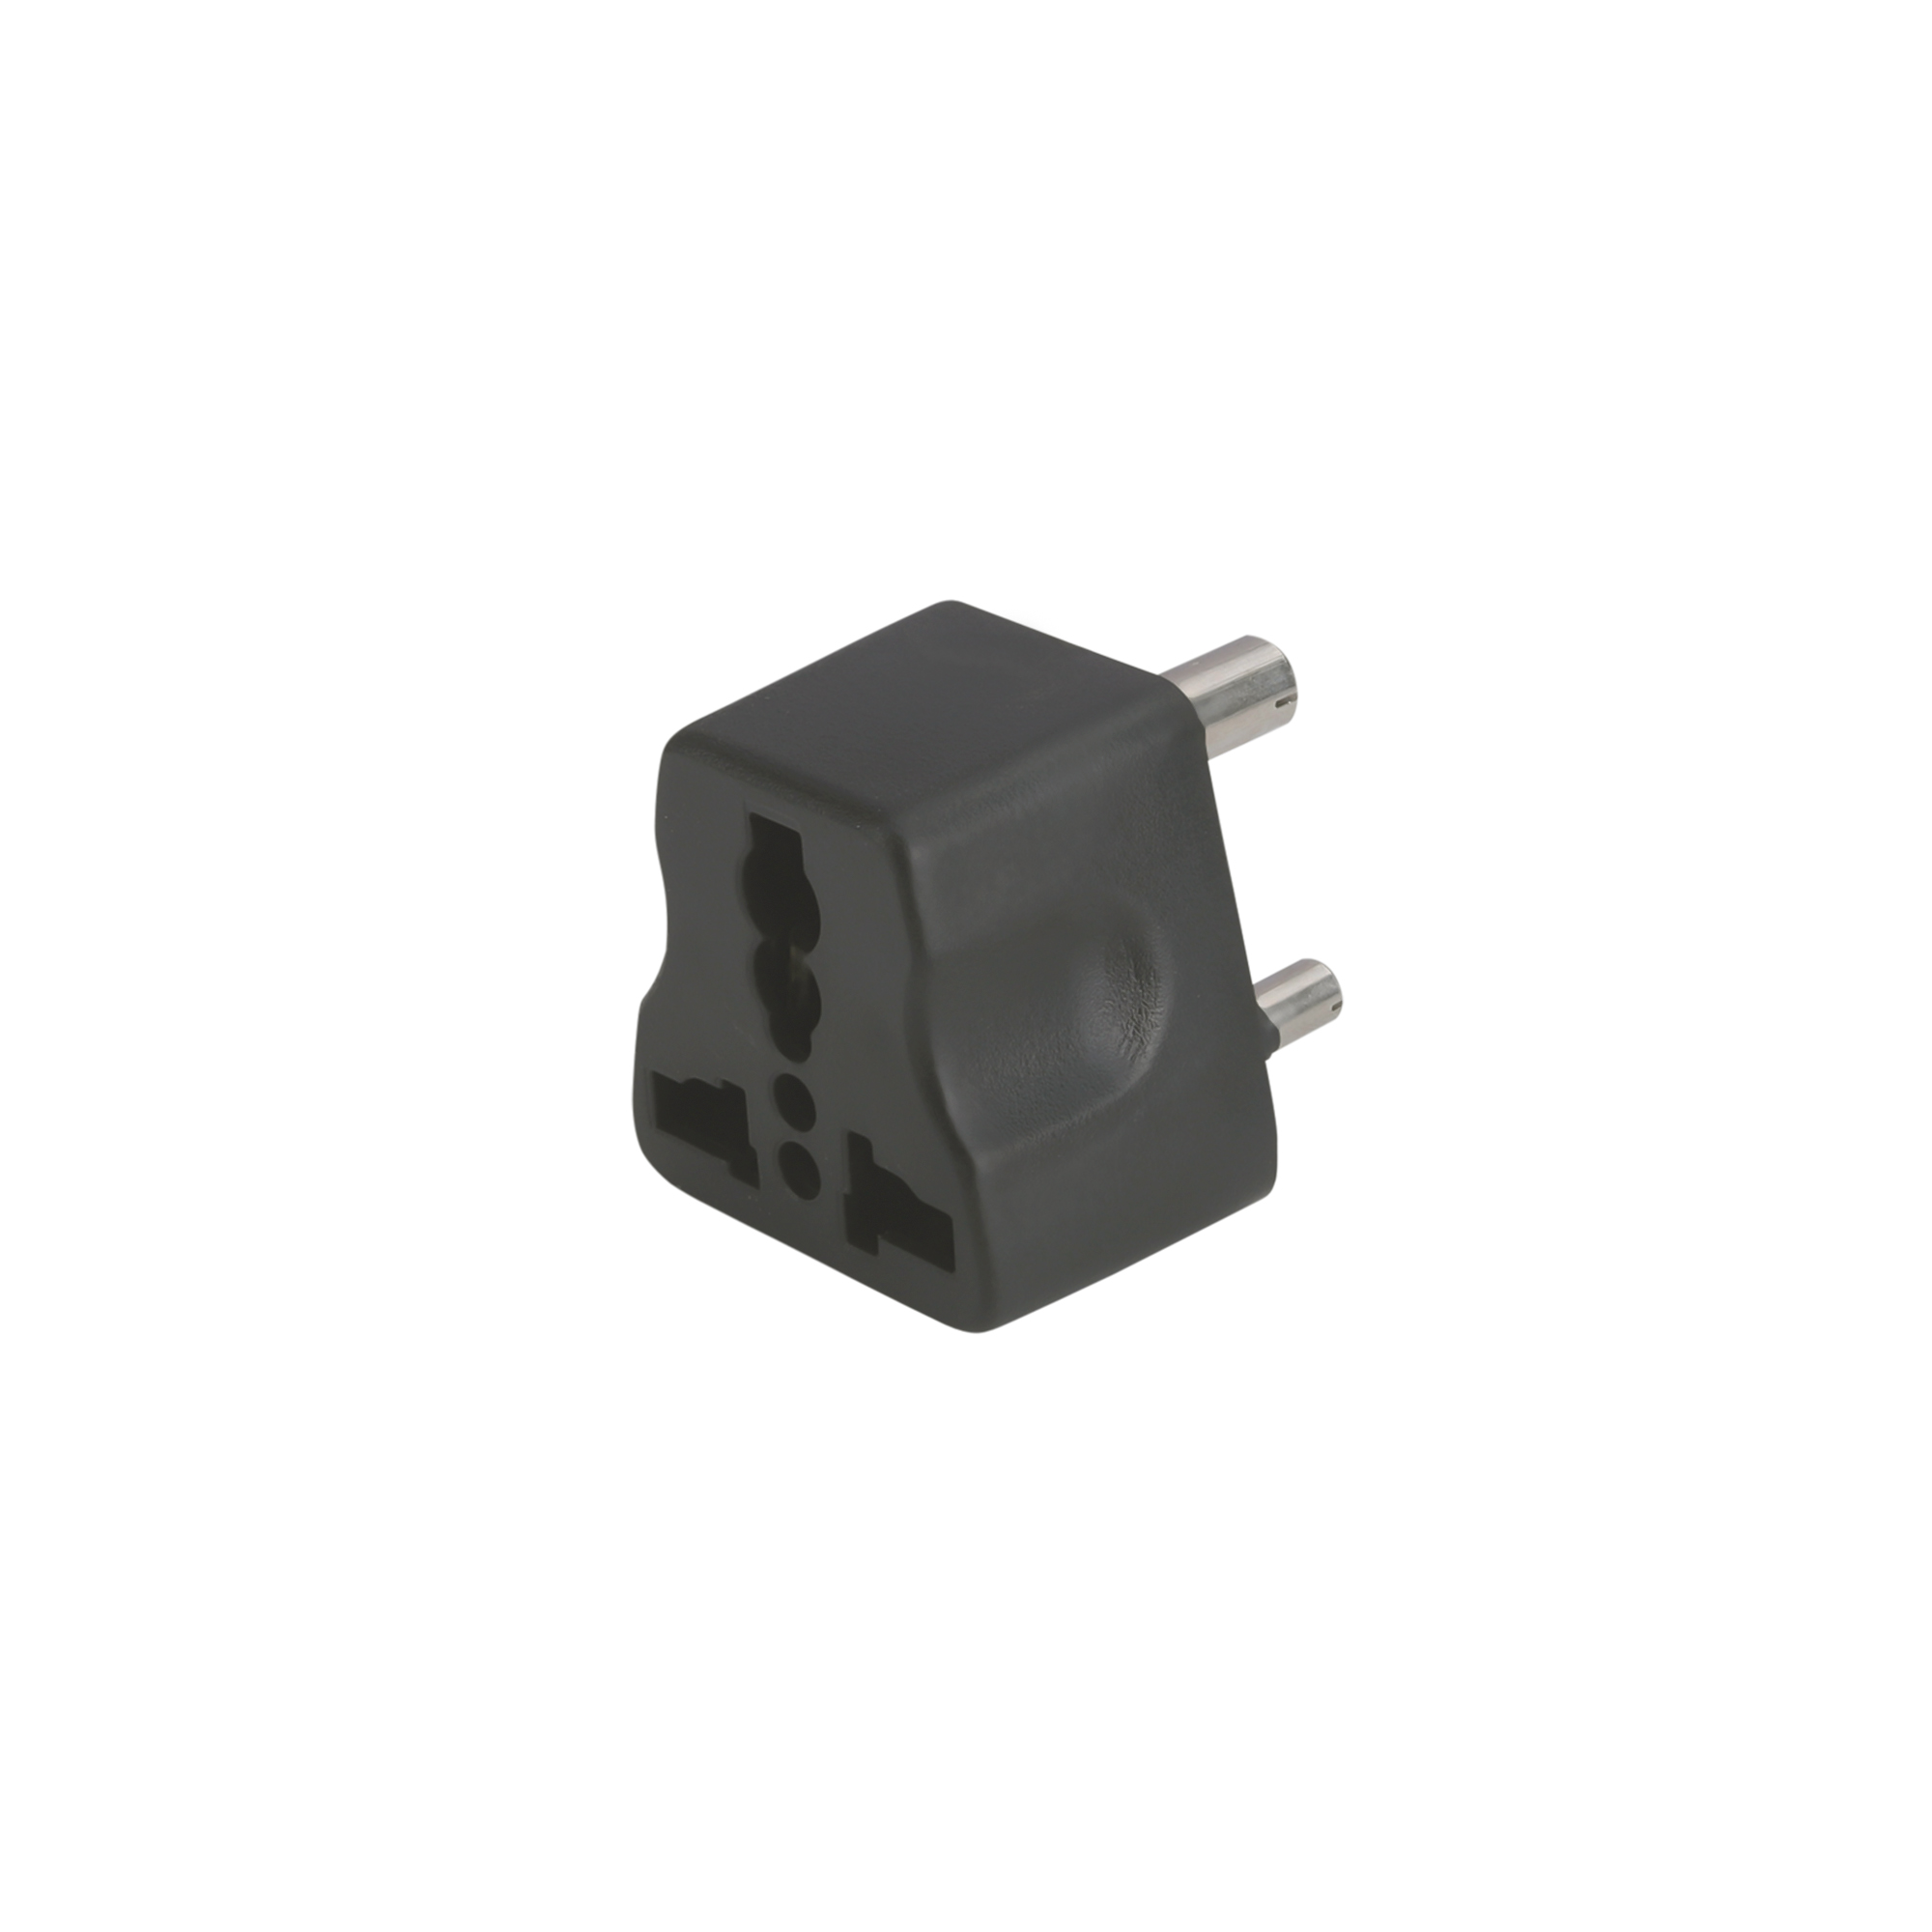 MX Universal Conversion Plug - 3 PIN For INDIA & SOUTH AFRICA.